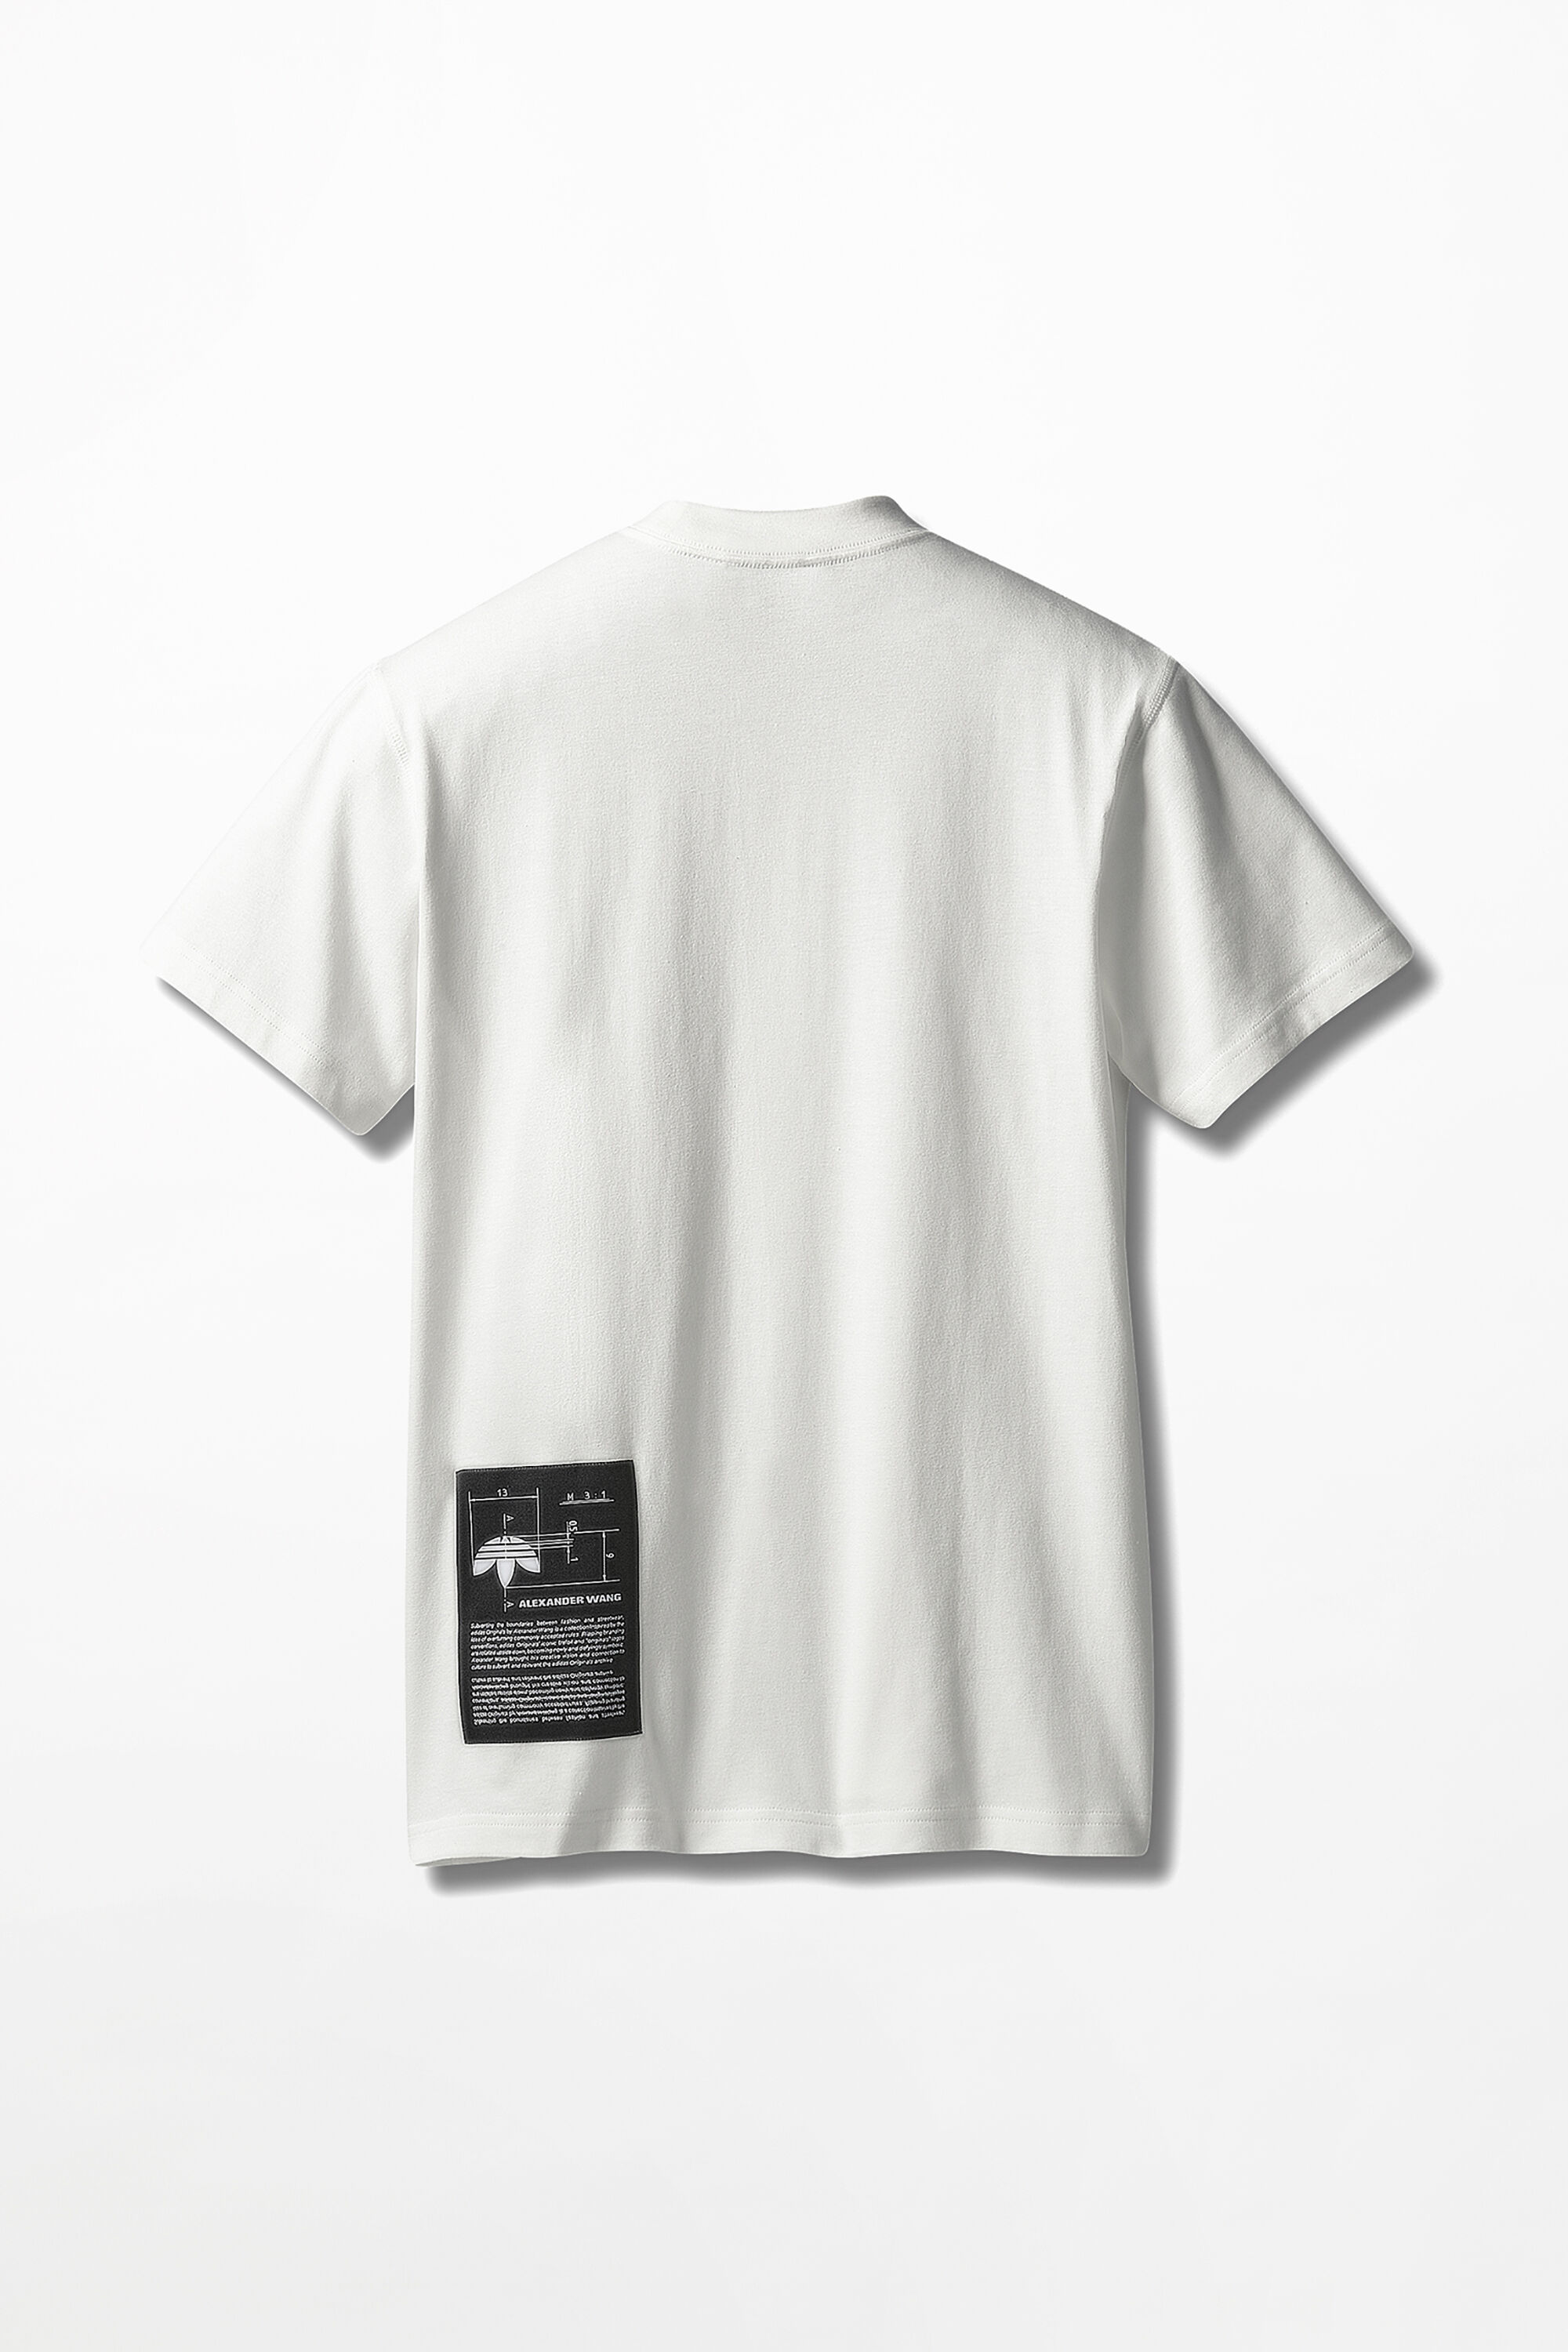 adidas originals by aw graphic tee